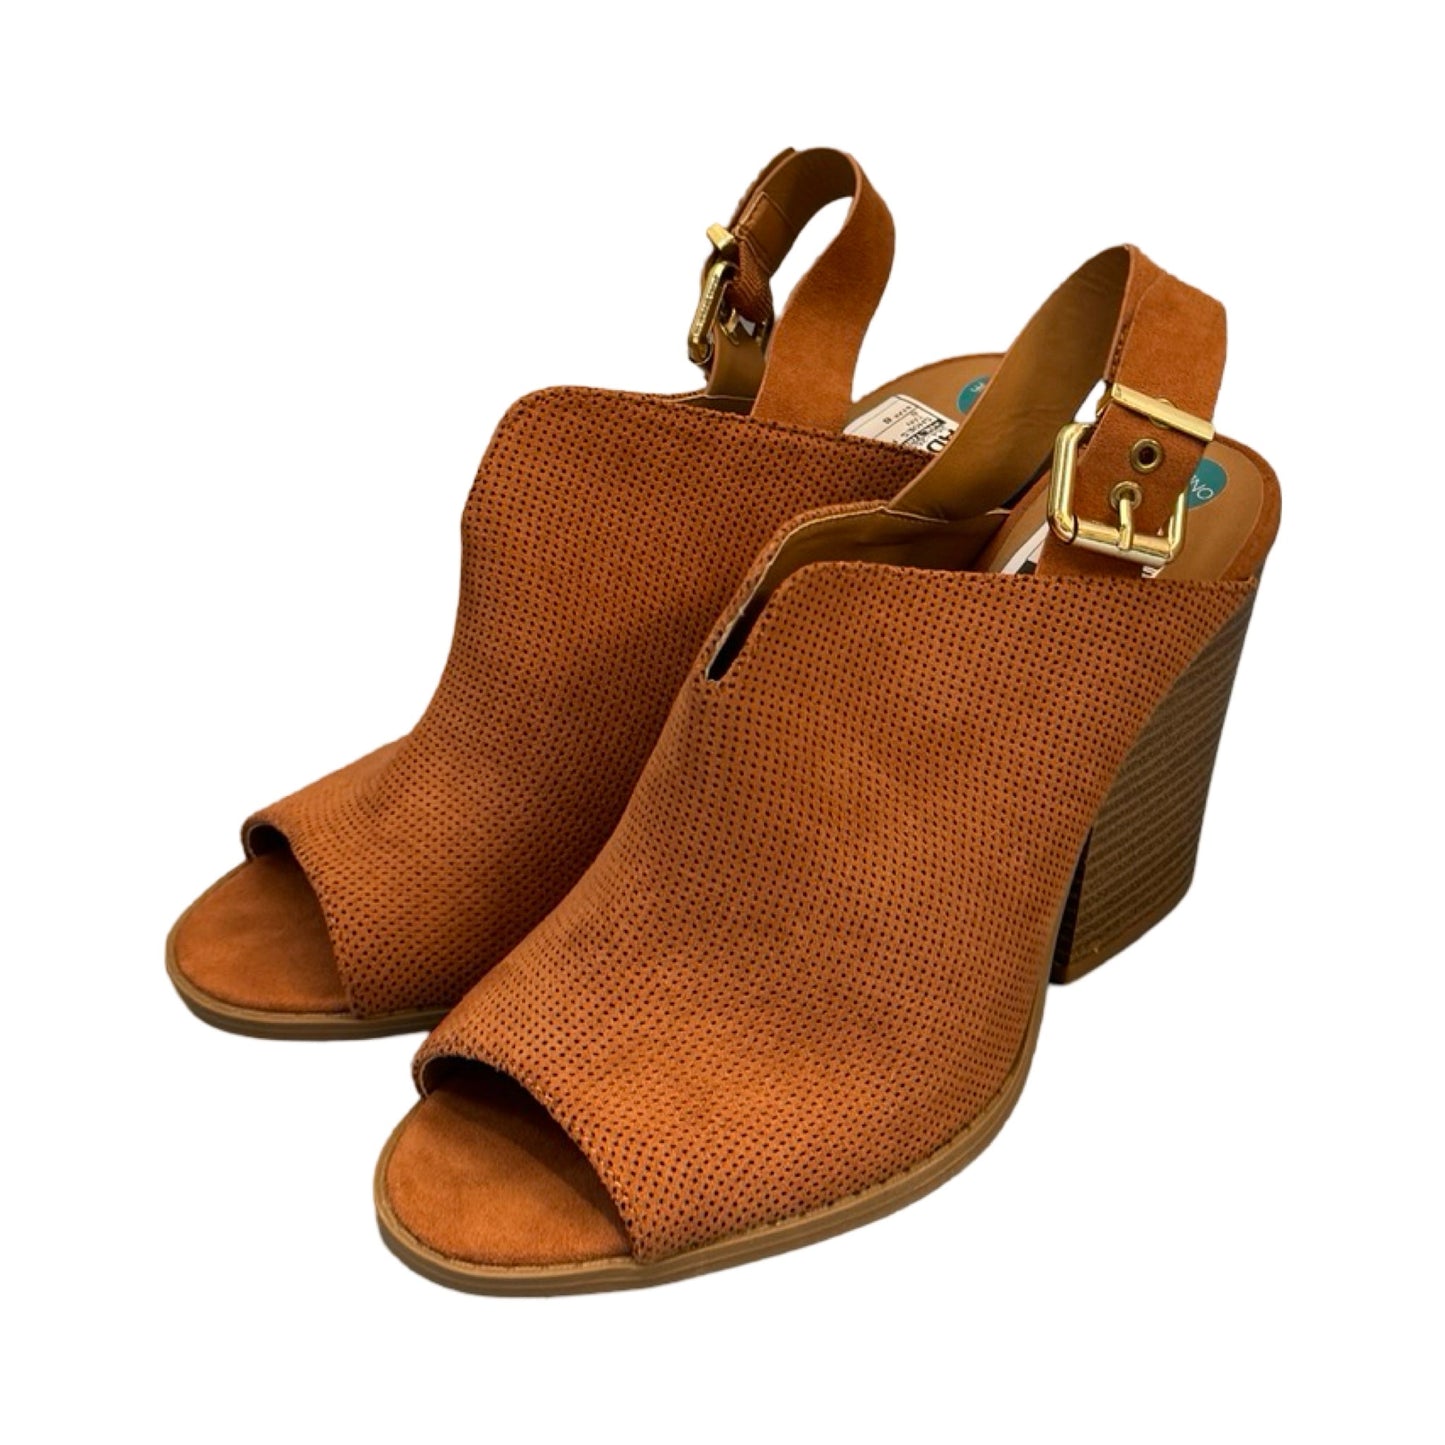 Tan Shoes Heels Block Altard State, Size 8